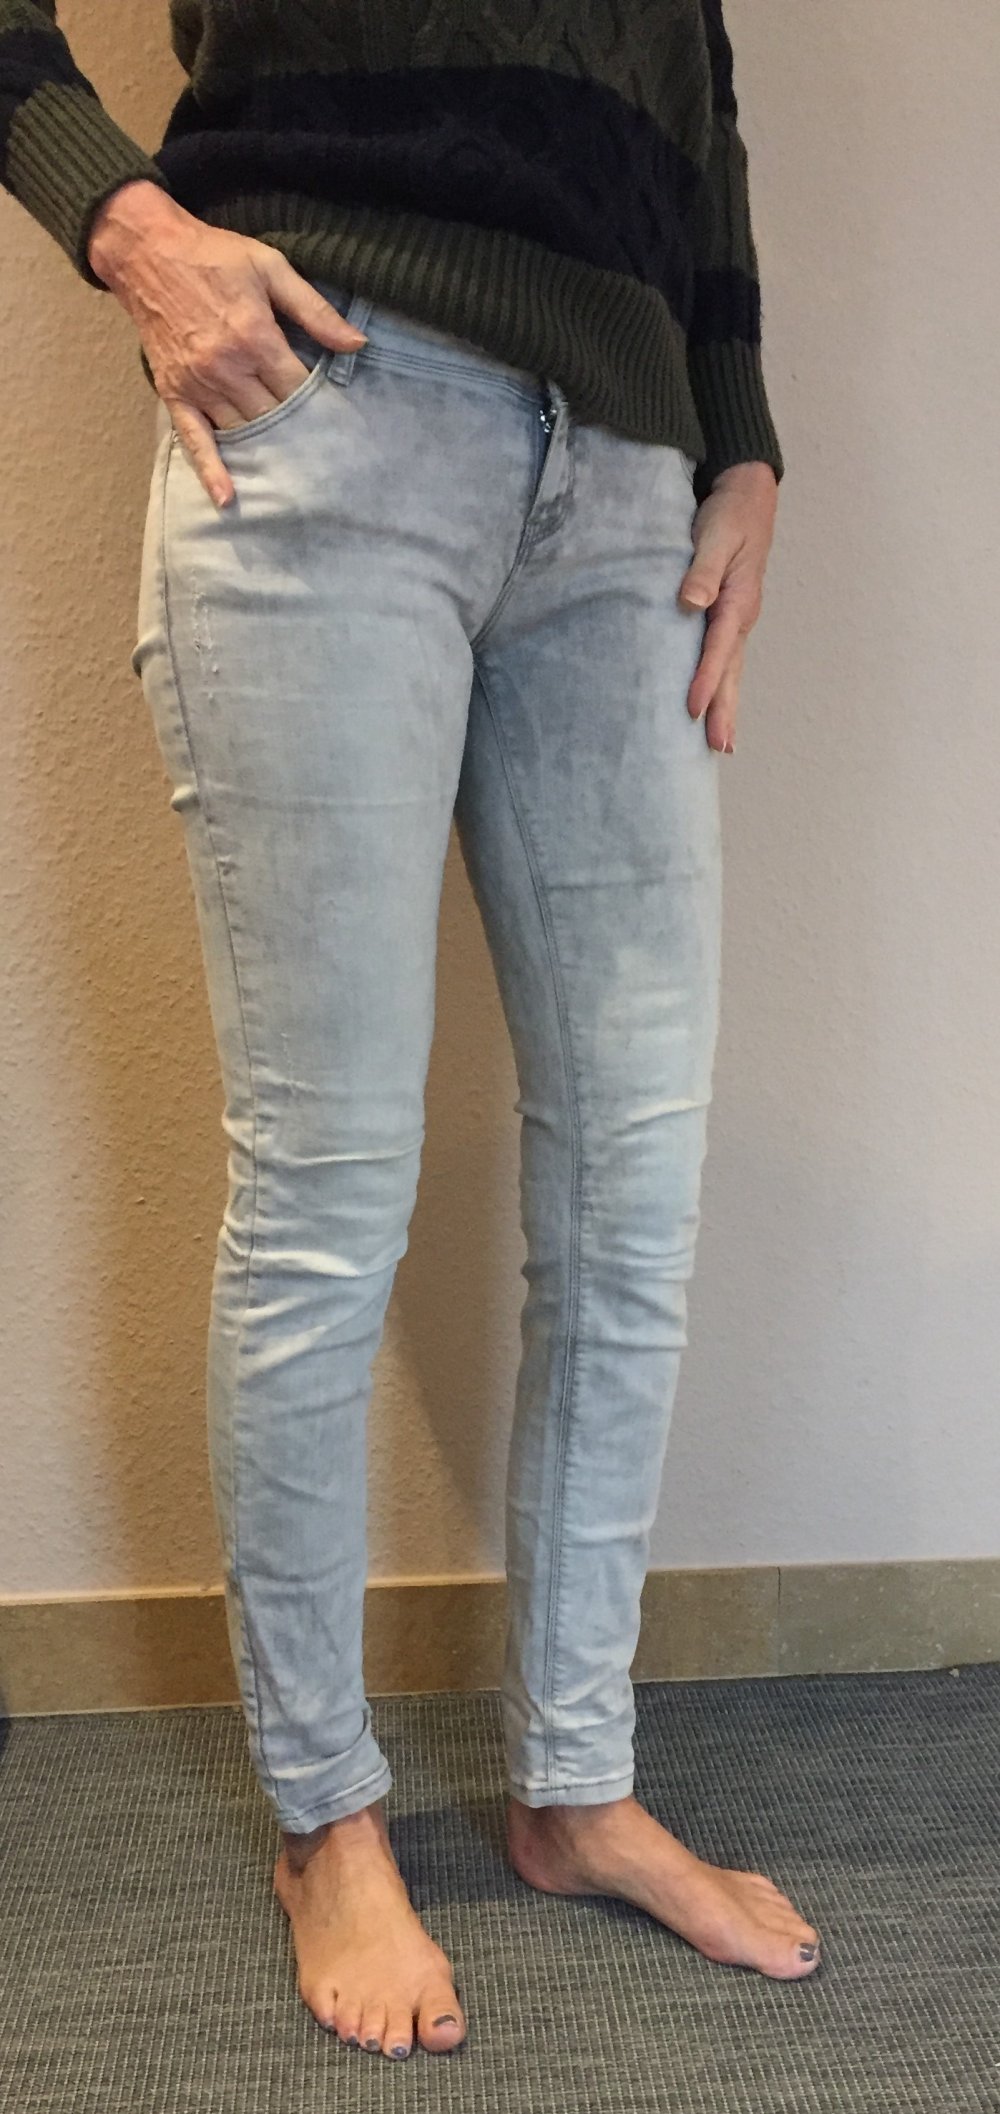 Cipo & Baxx Stretch Jeans Gr.S (28/32) im Destroyed Look